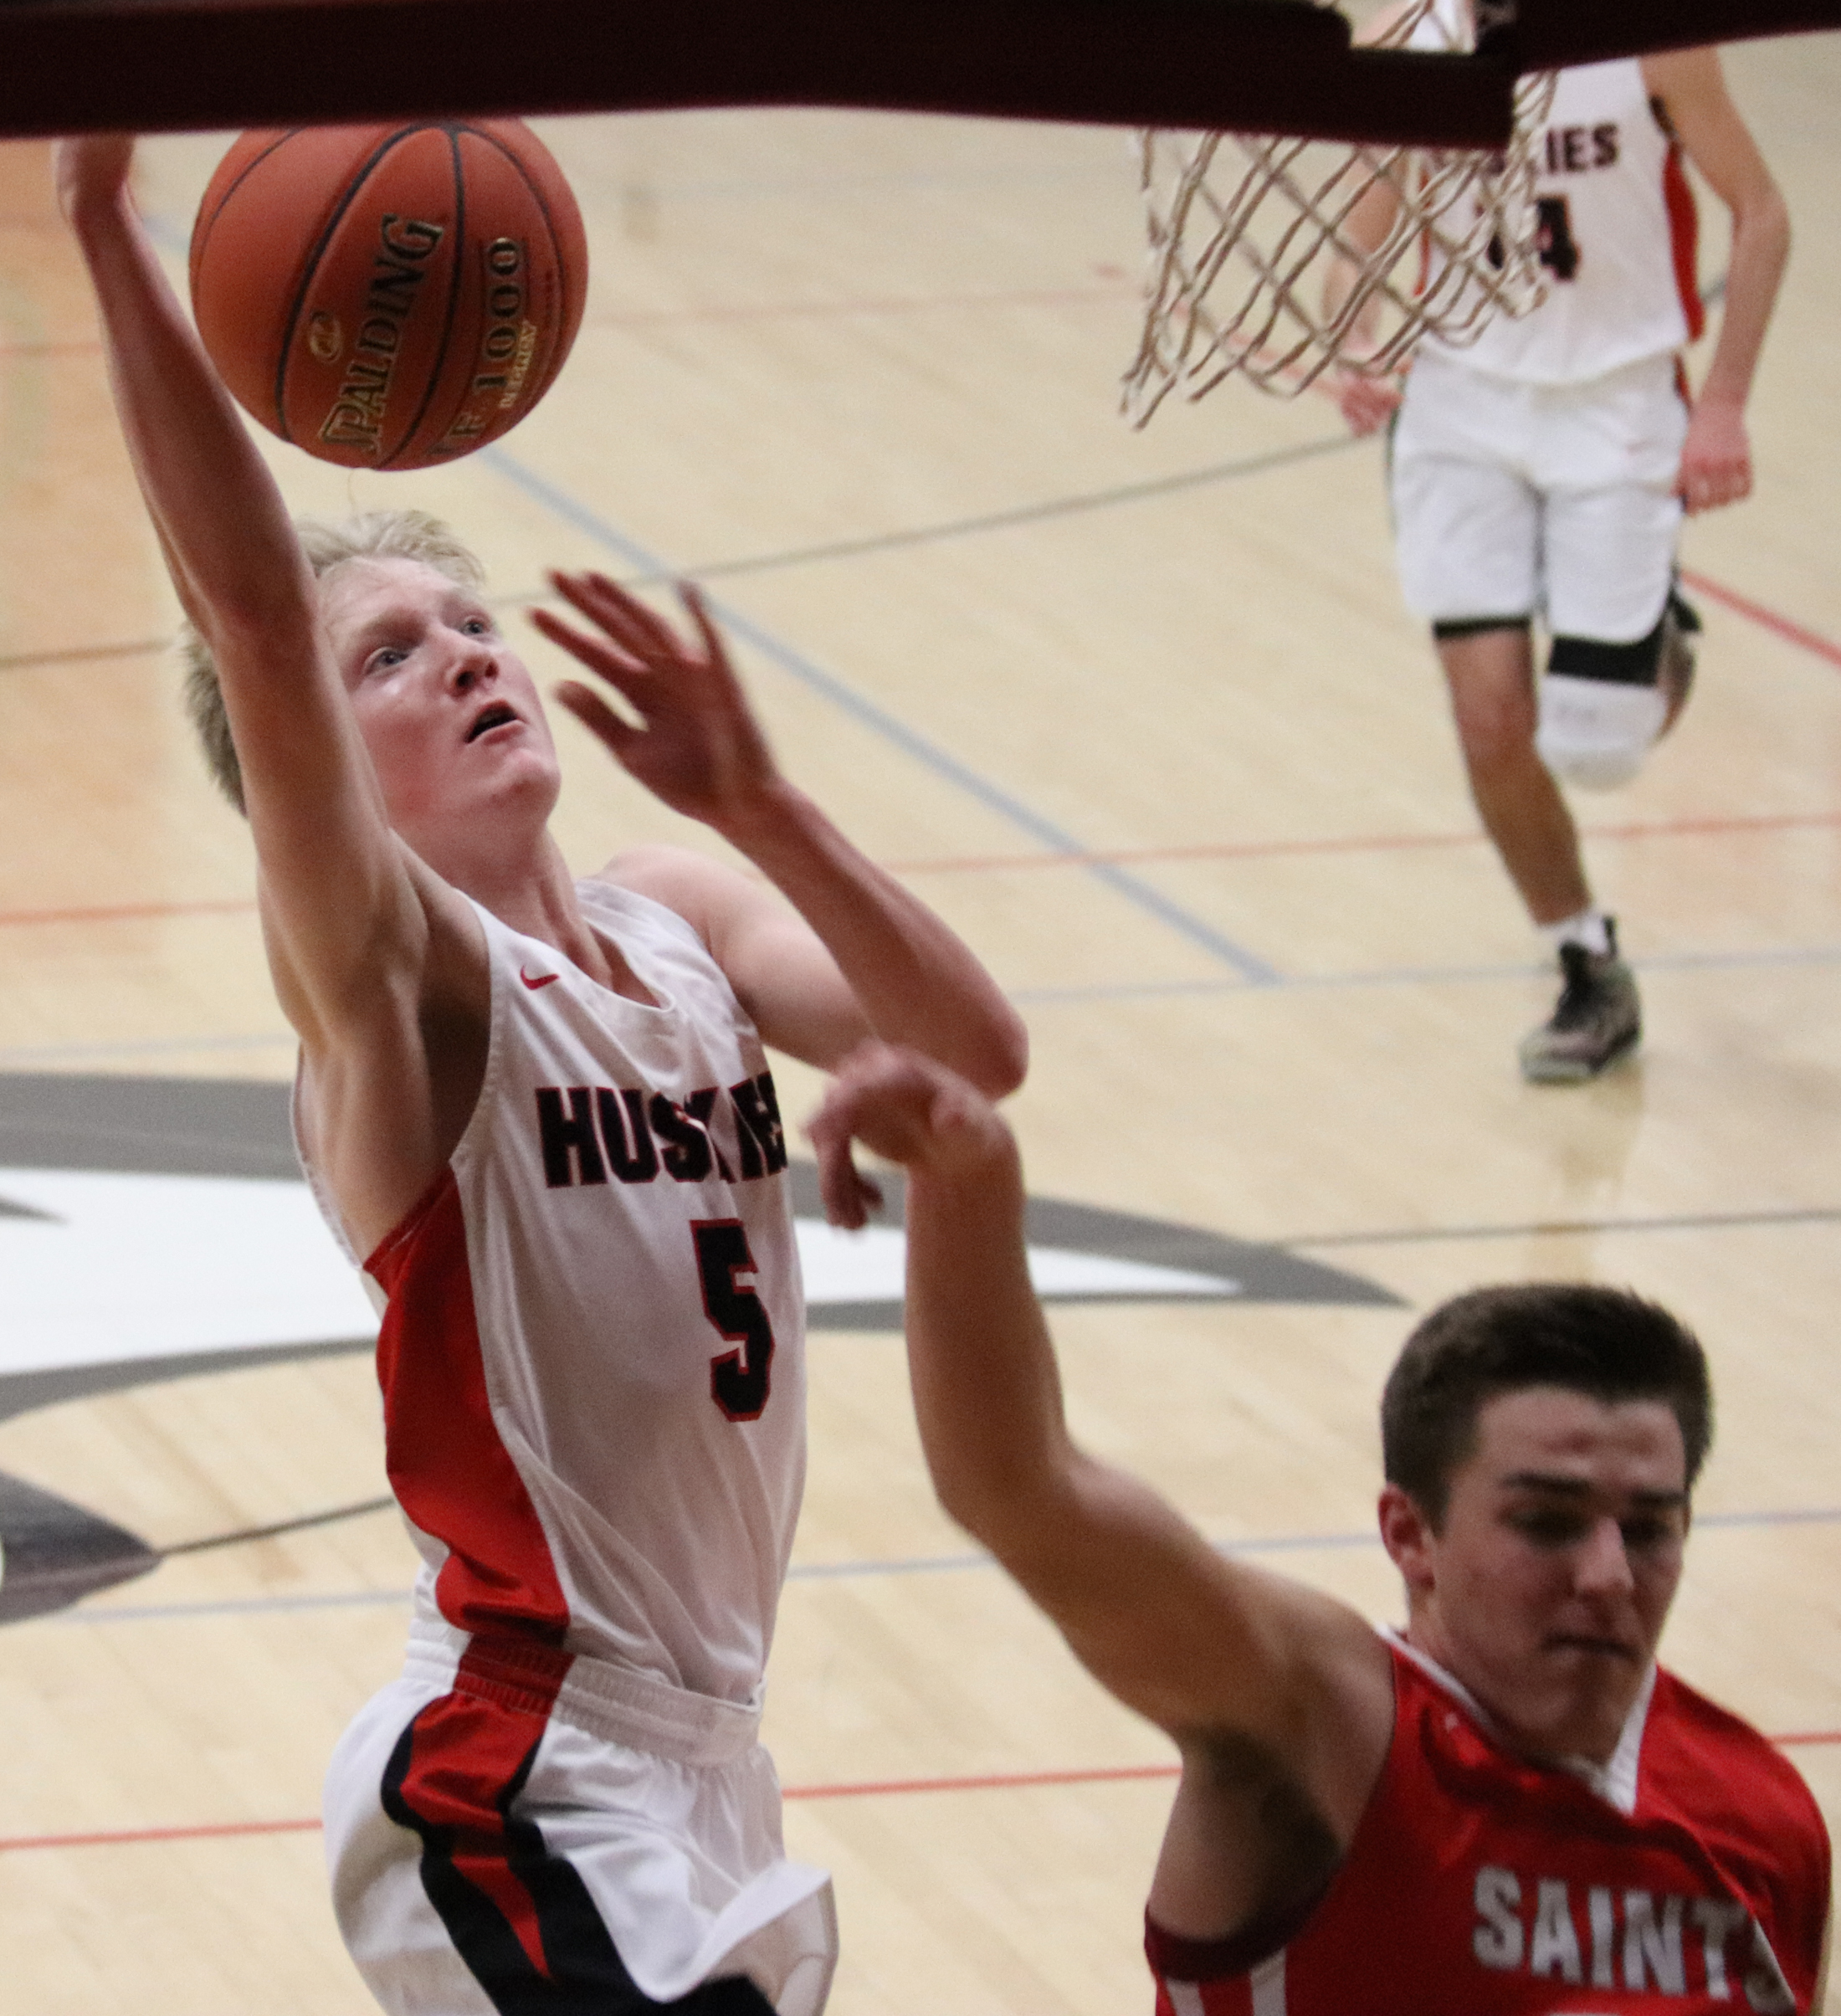 Local players named to All-TOIE basketball teams